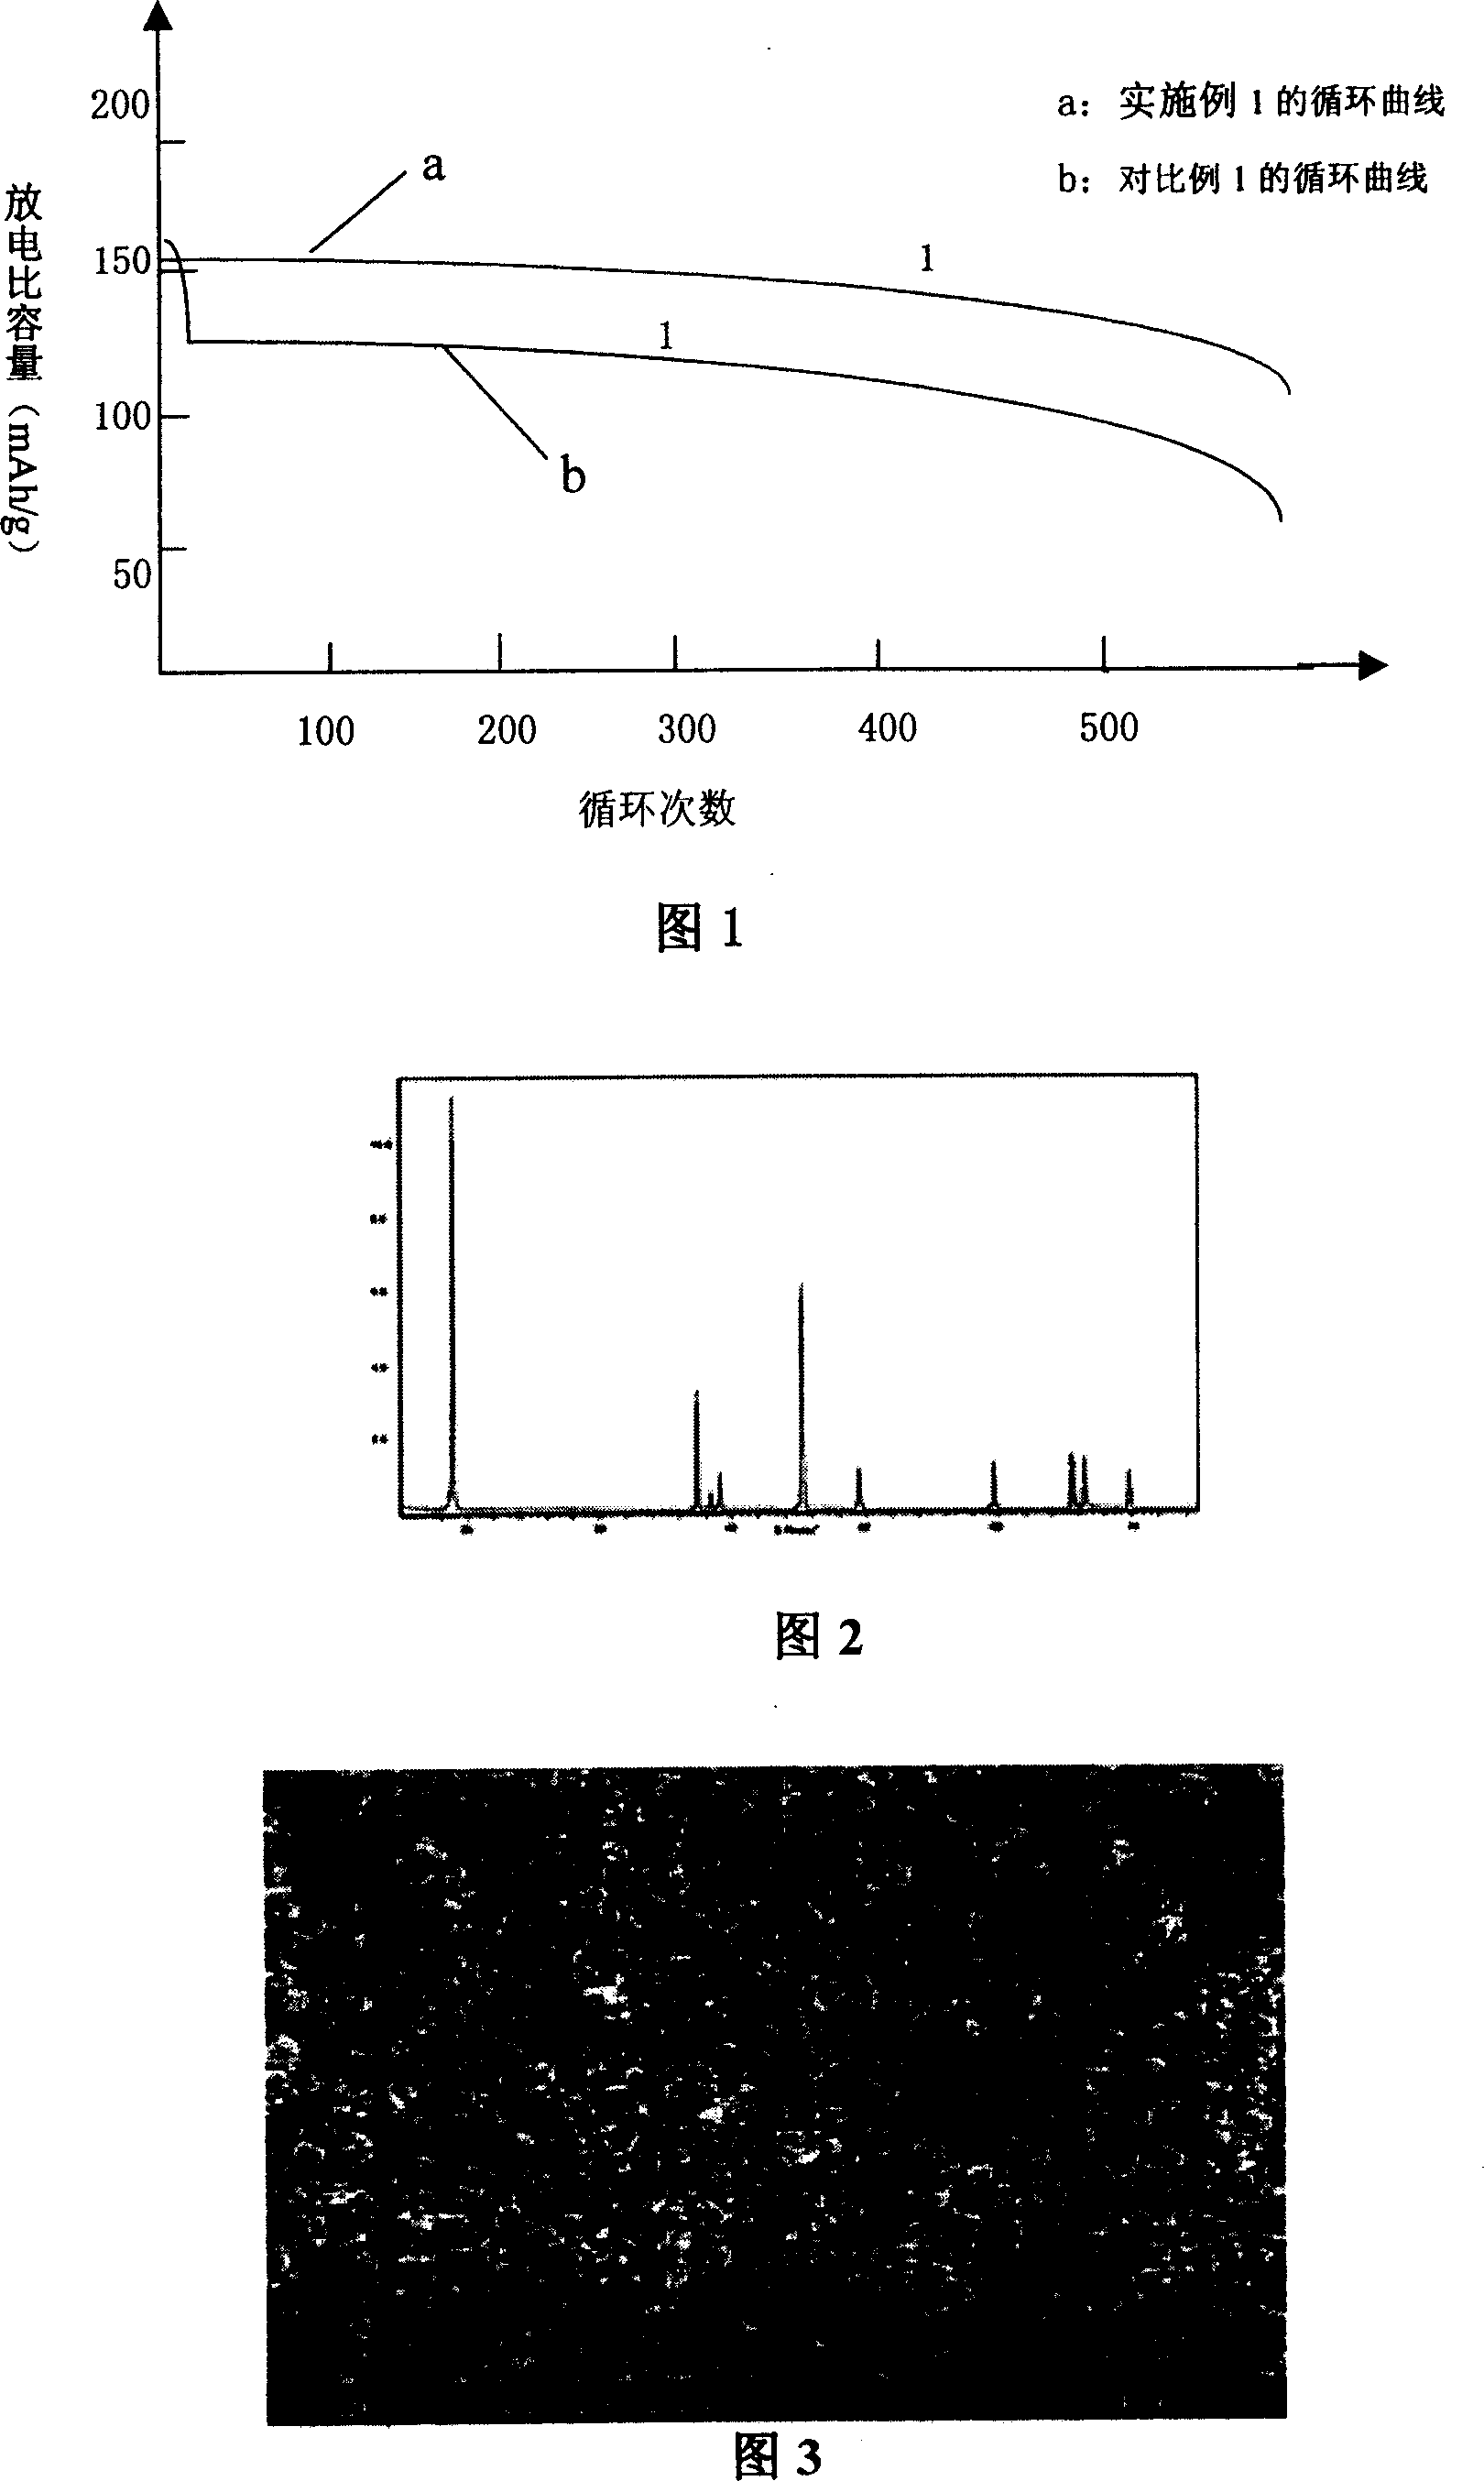 Method for producing lithium battery anode material doped with multi-elements by secondary depositing method